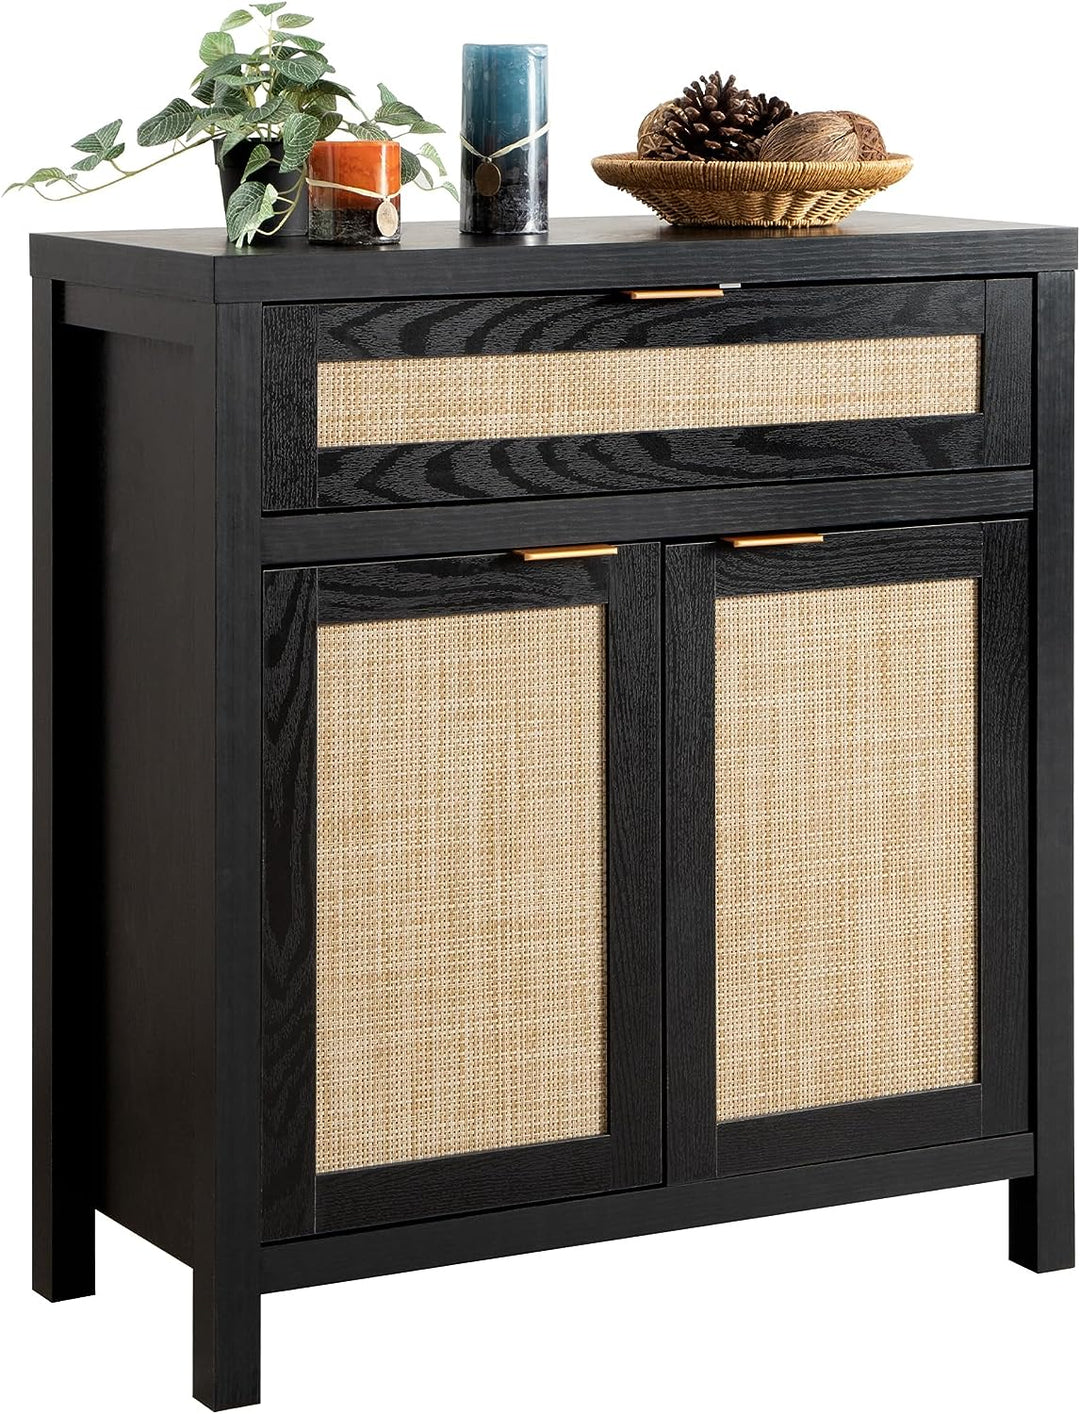 Sideboard Buffet Storage Cabinet, Rattan Accent Cabinet with Doors and Drawer, Modern Credenzas Buffet Table Console Coffee Bar Cabinet